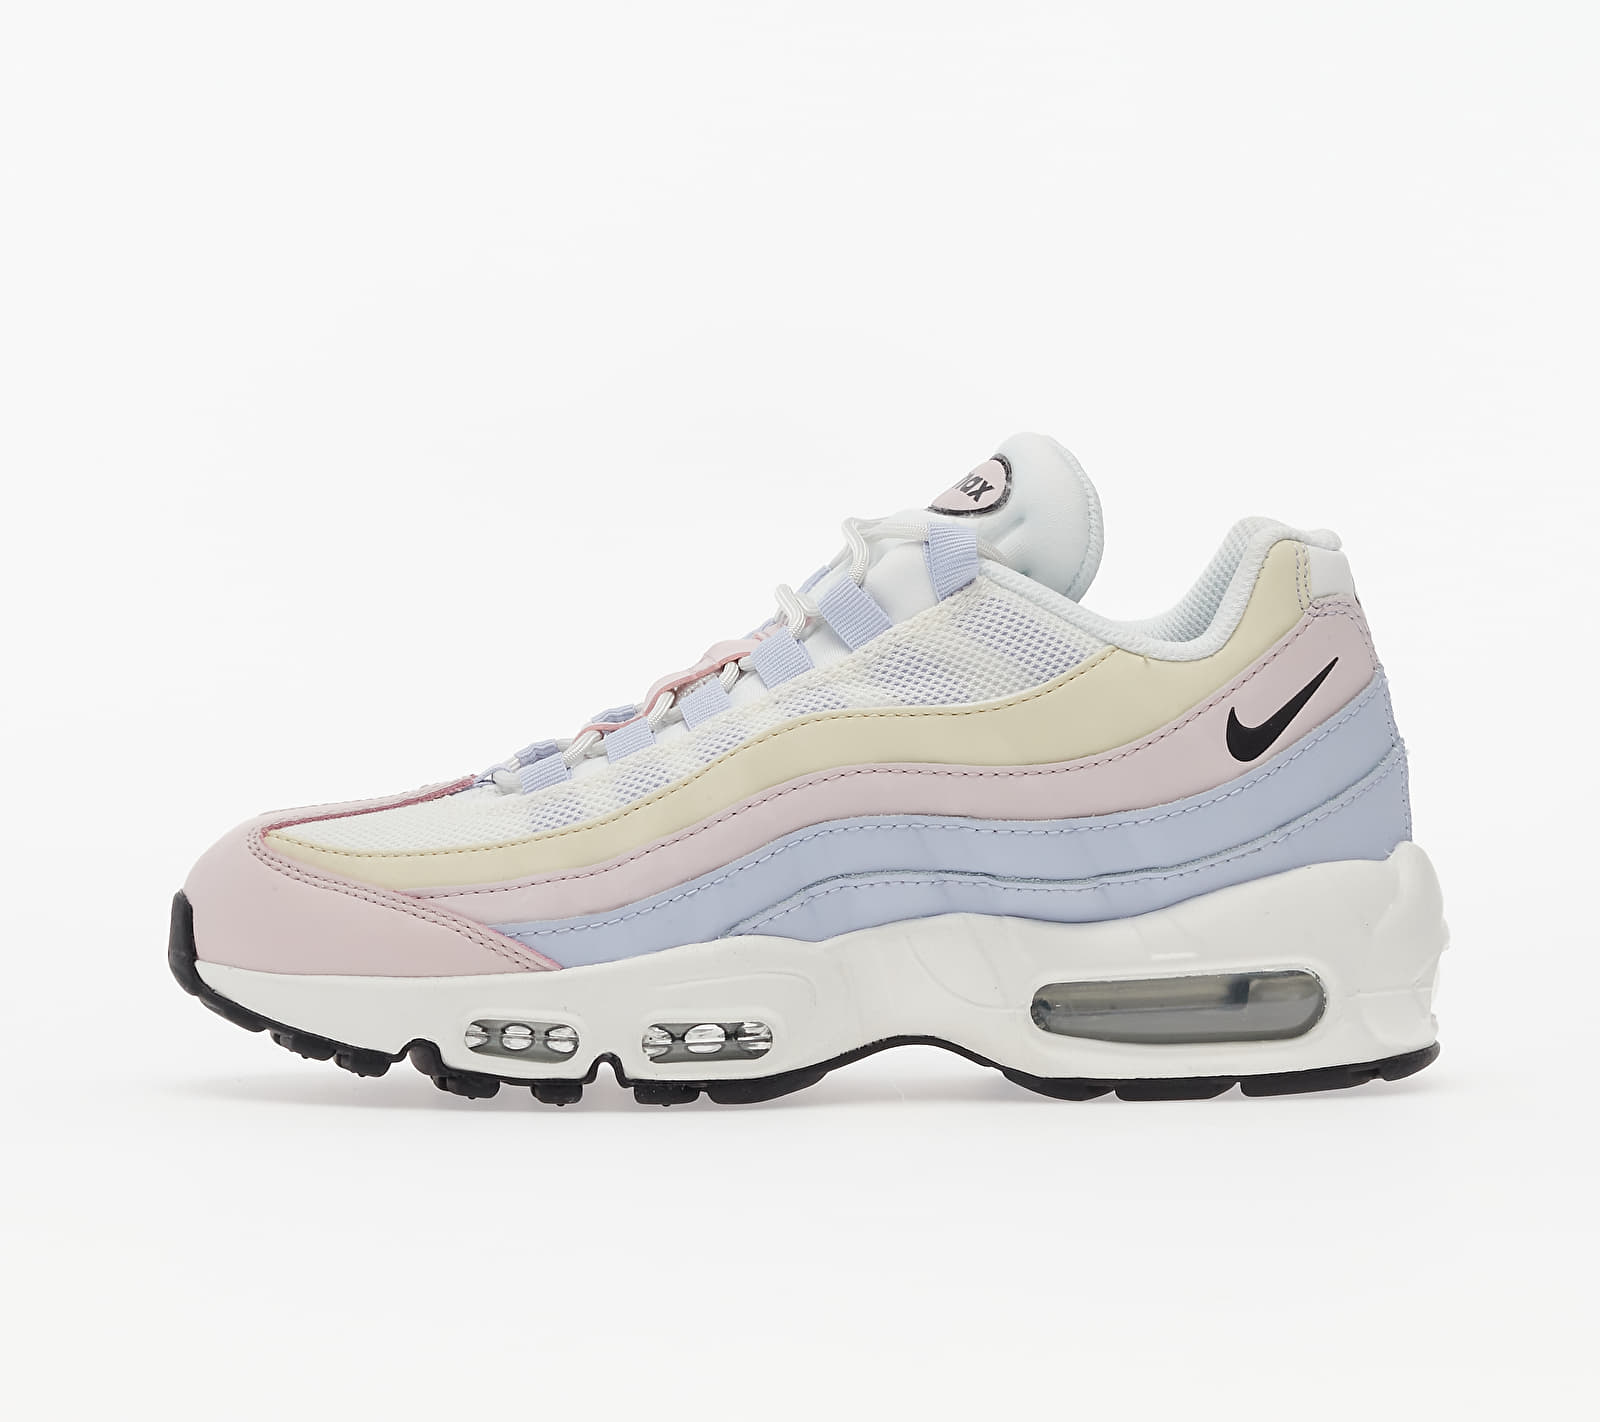 Nike Air Max 95 Ghost/ Black-Summit White-Barely Rose CZ5659-001